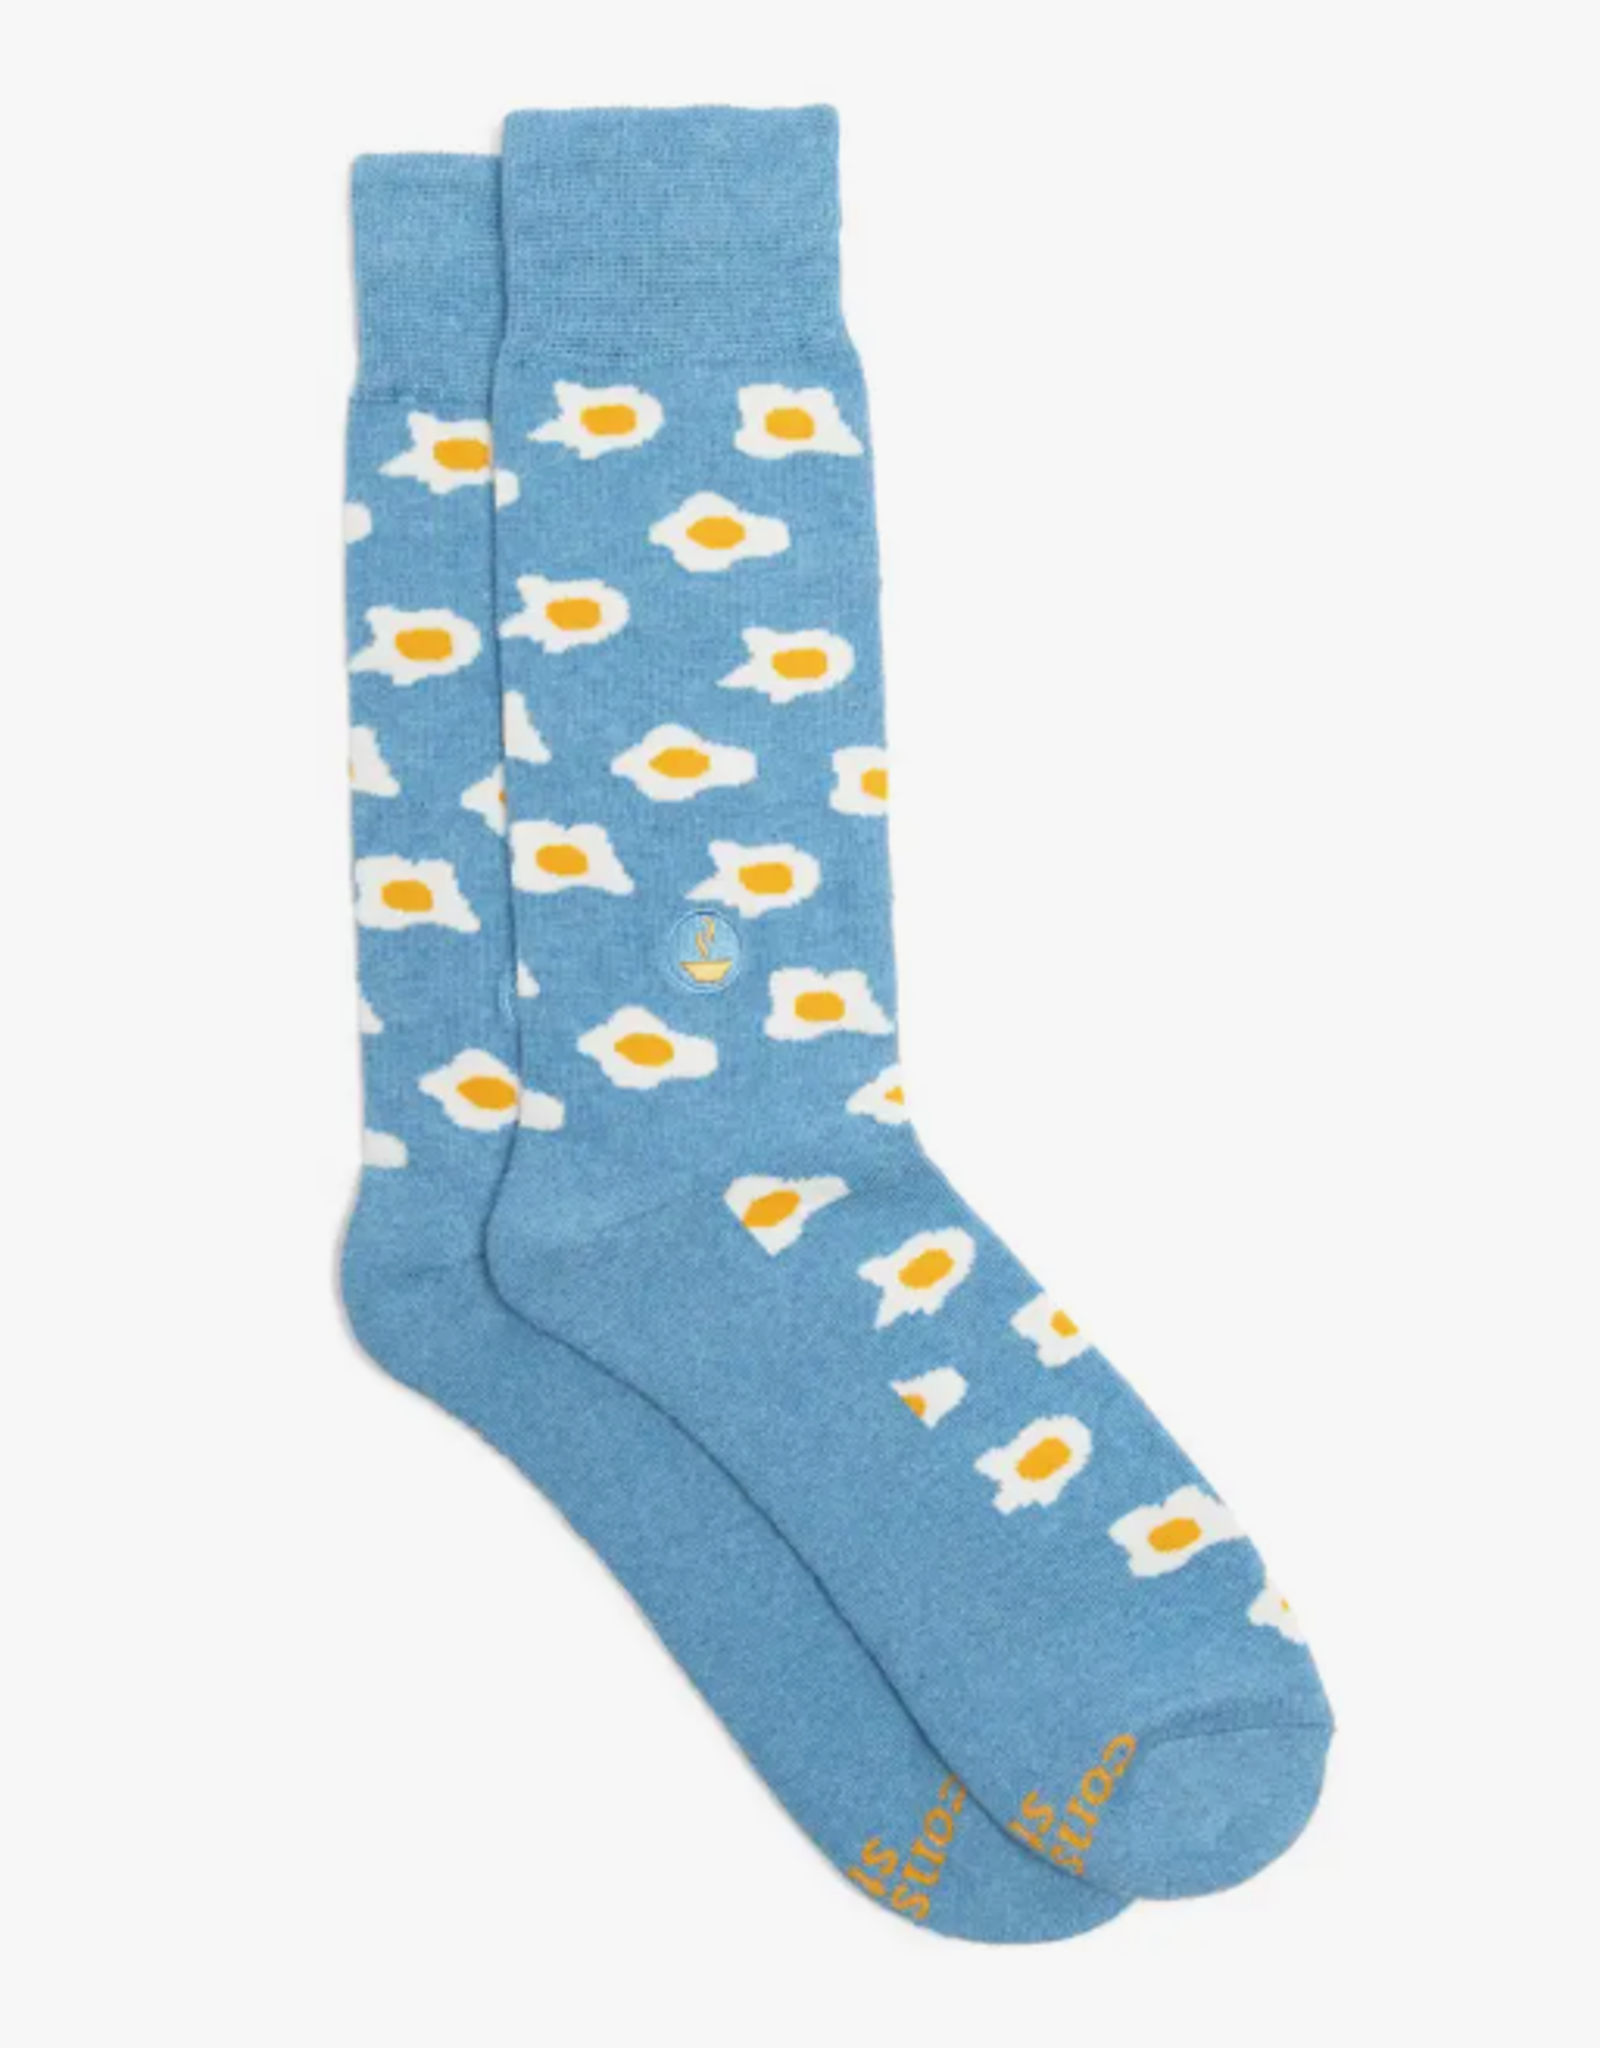 Conscious Step Socks that Provide Meals (Blue Eggs)